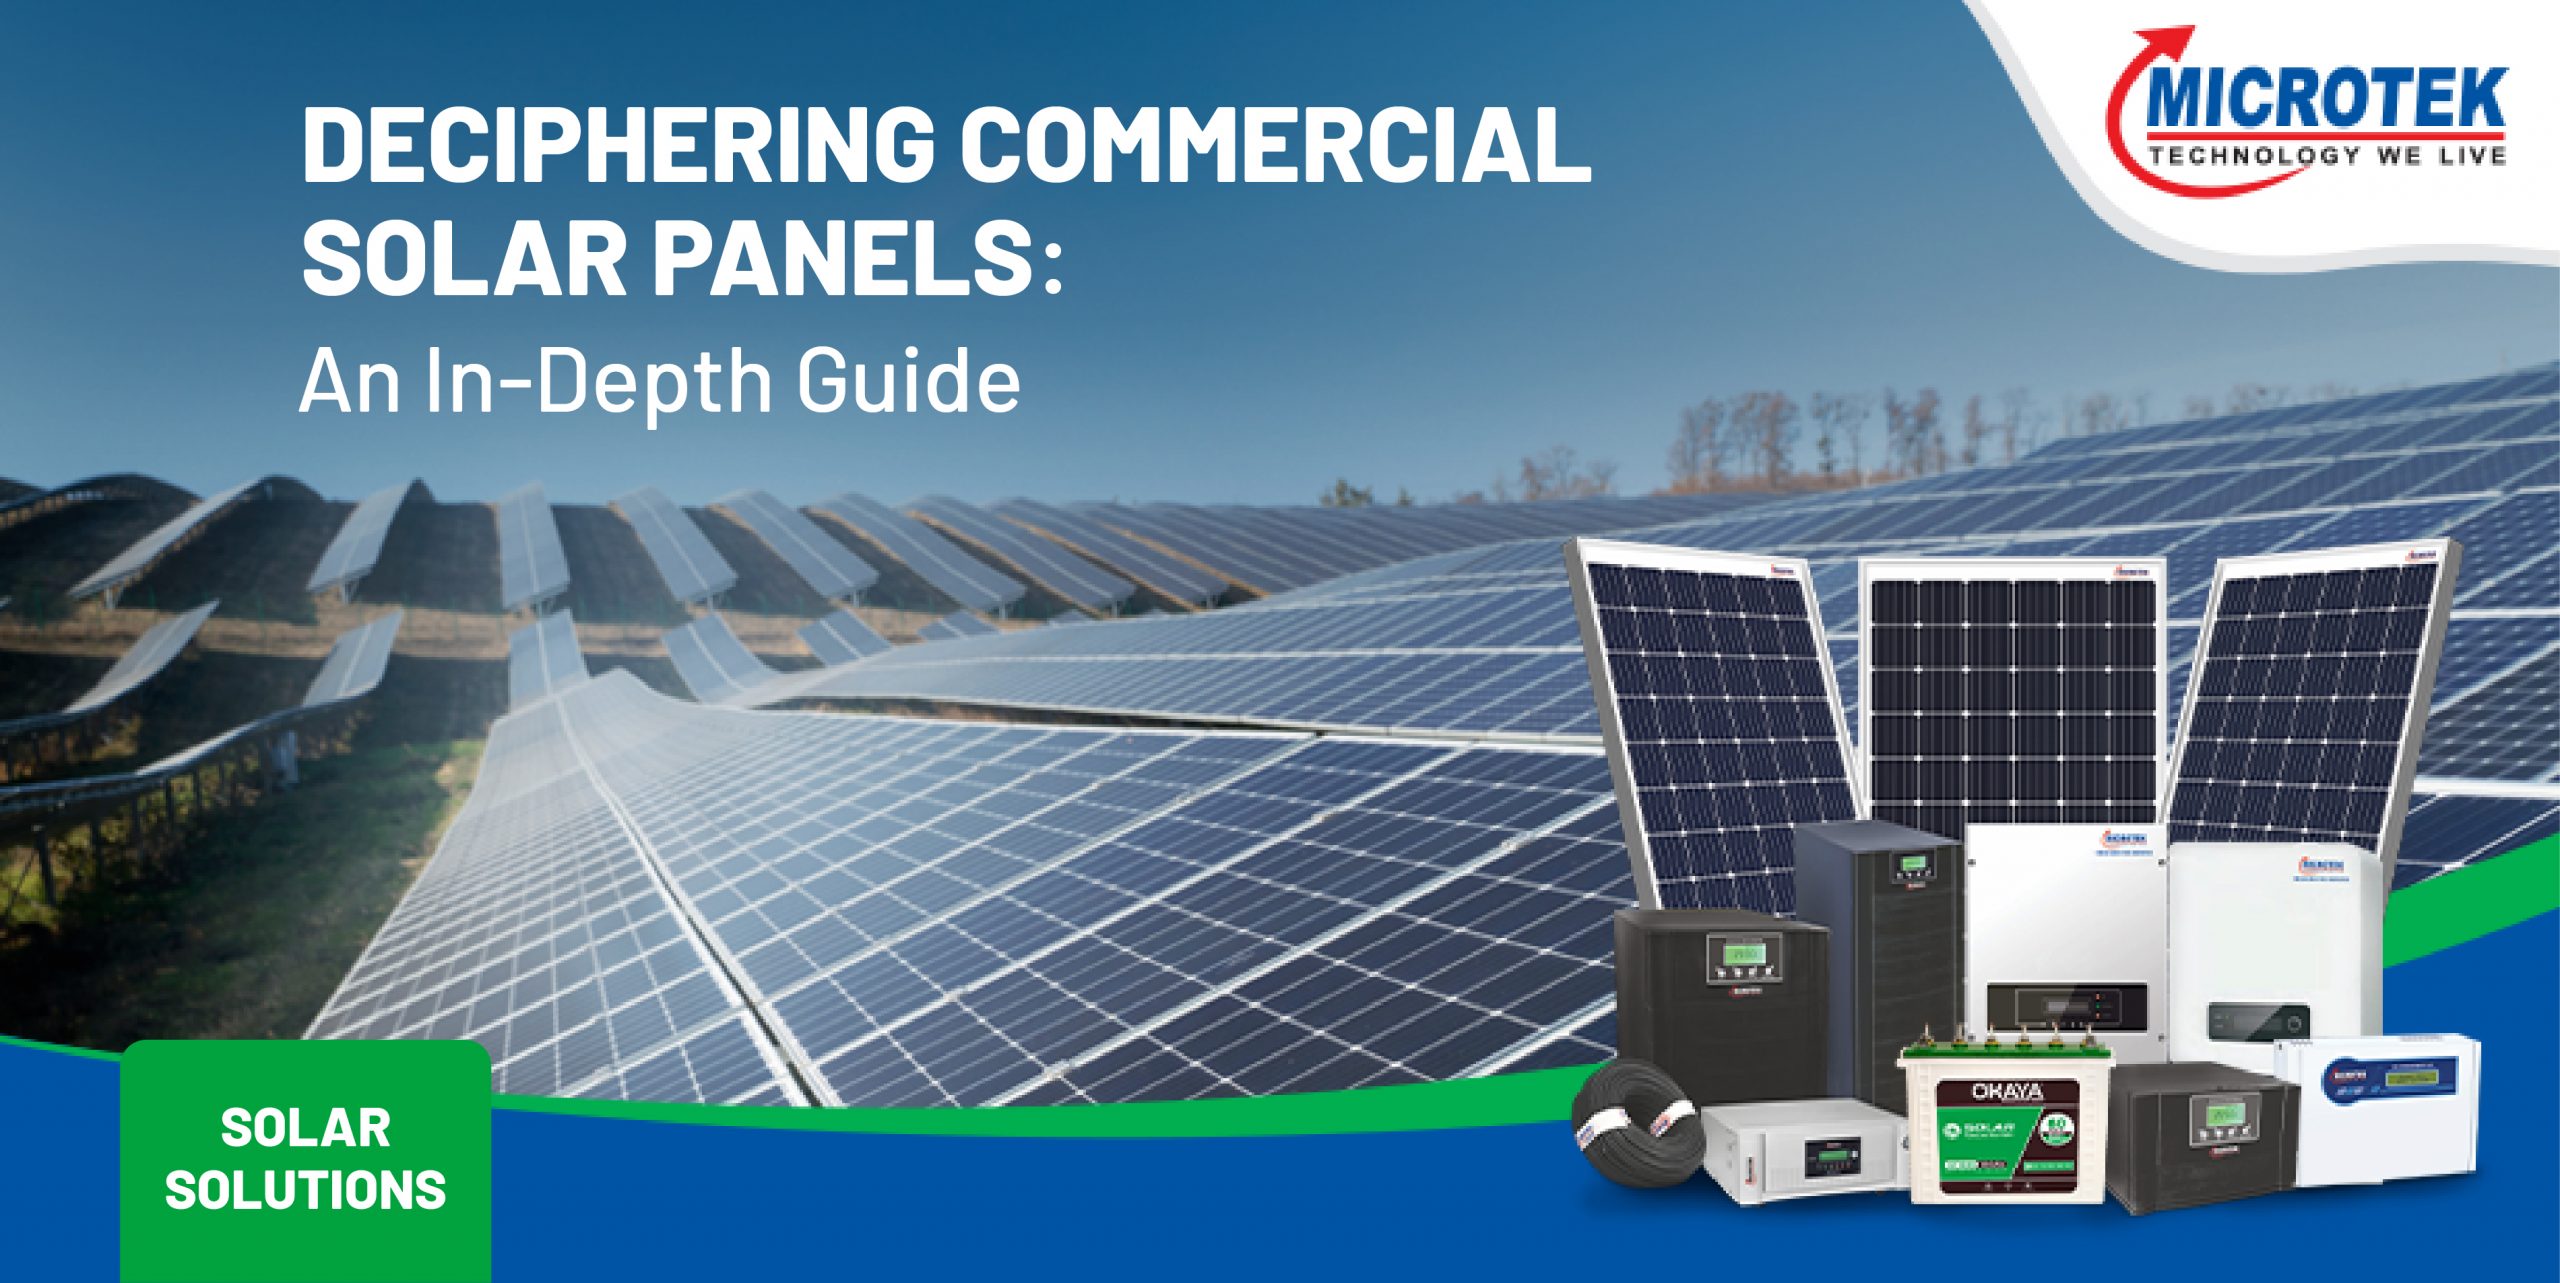 Deciphering Commercial Solar Panels: An In-Depth Guide